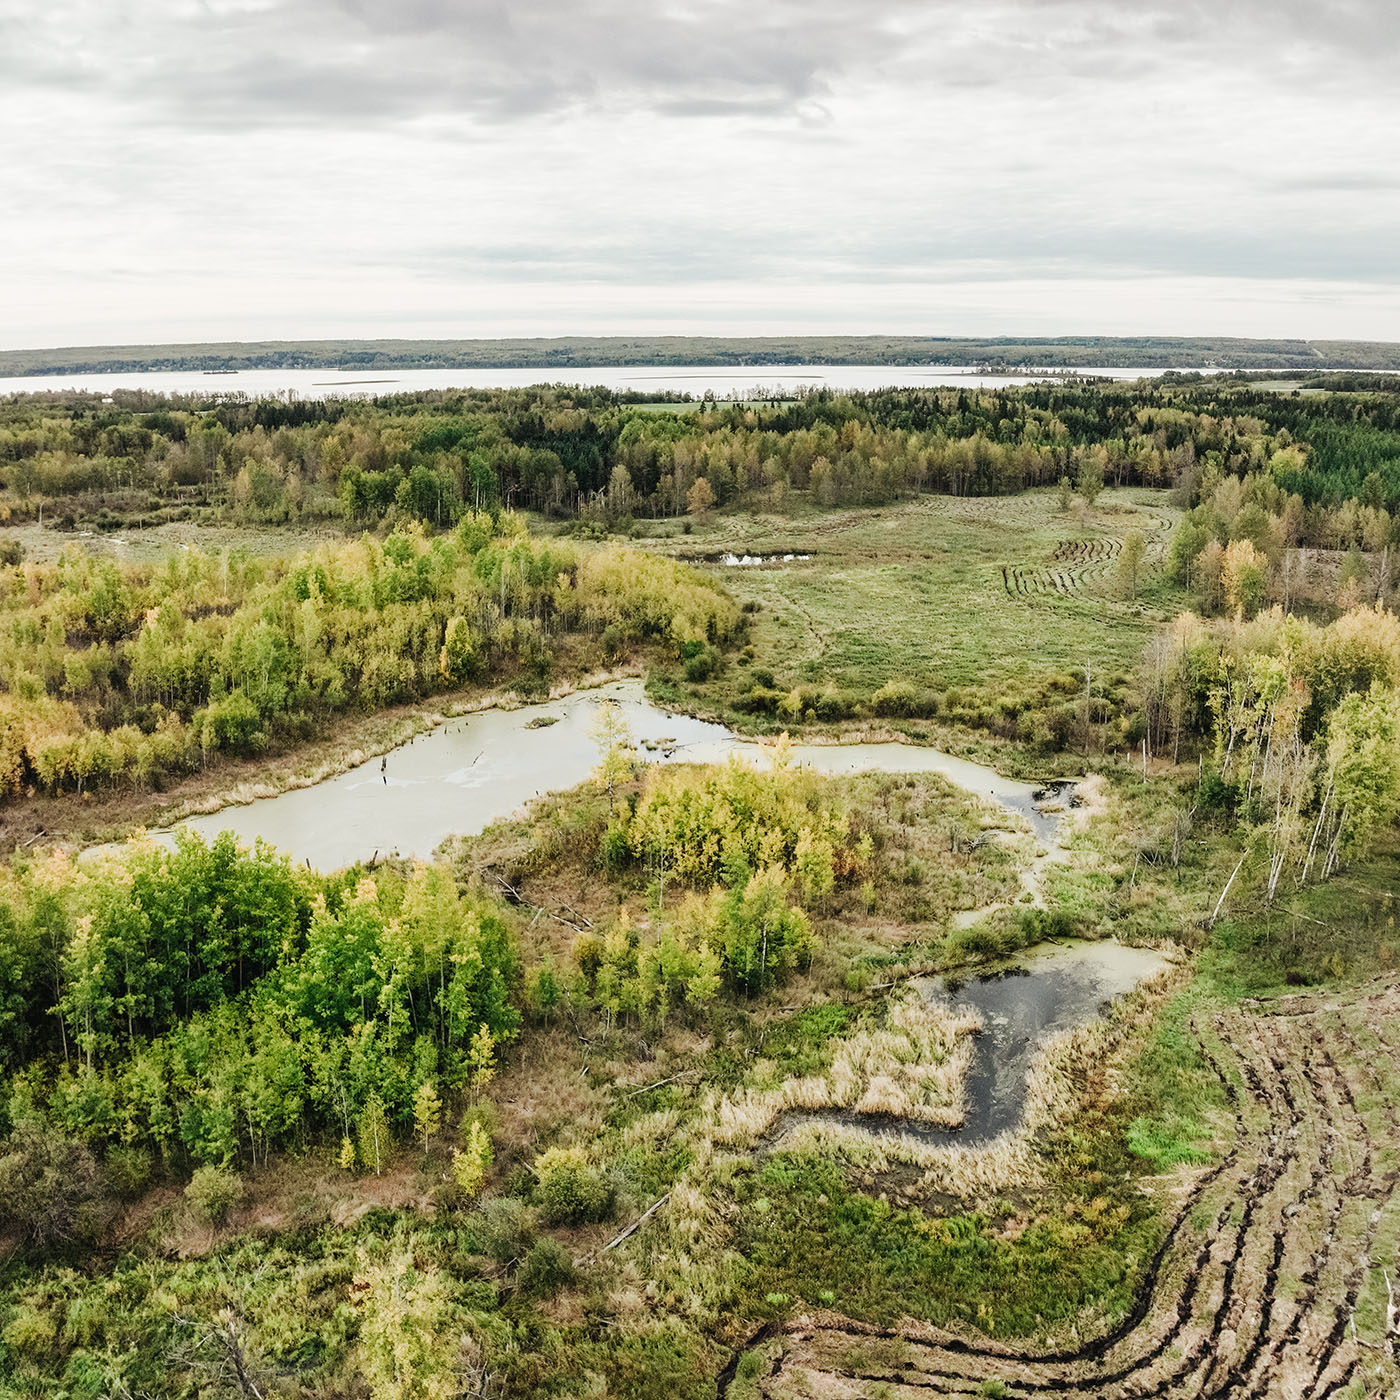 Drone shot of forest and wetland in Alberta, Canada.